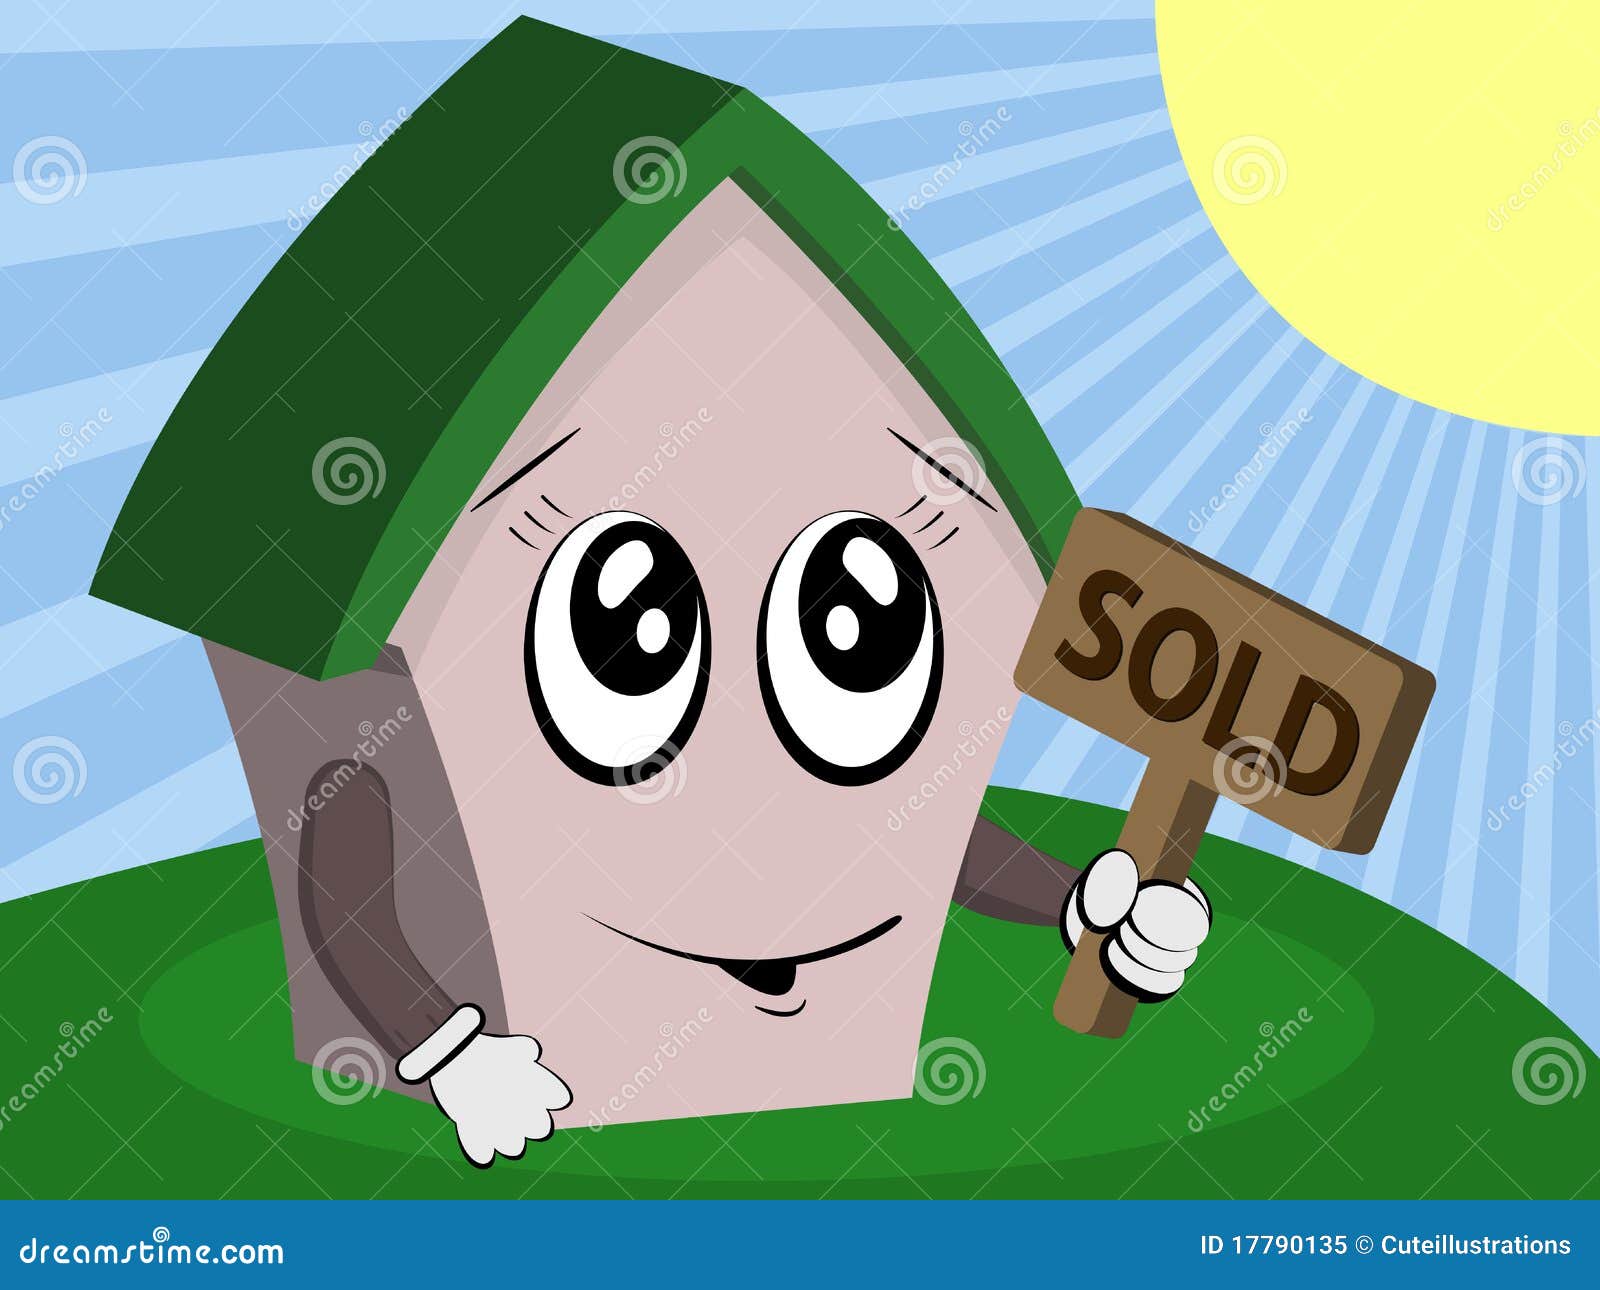 Sold happy house - sold-happy-house-17790135